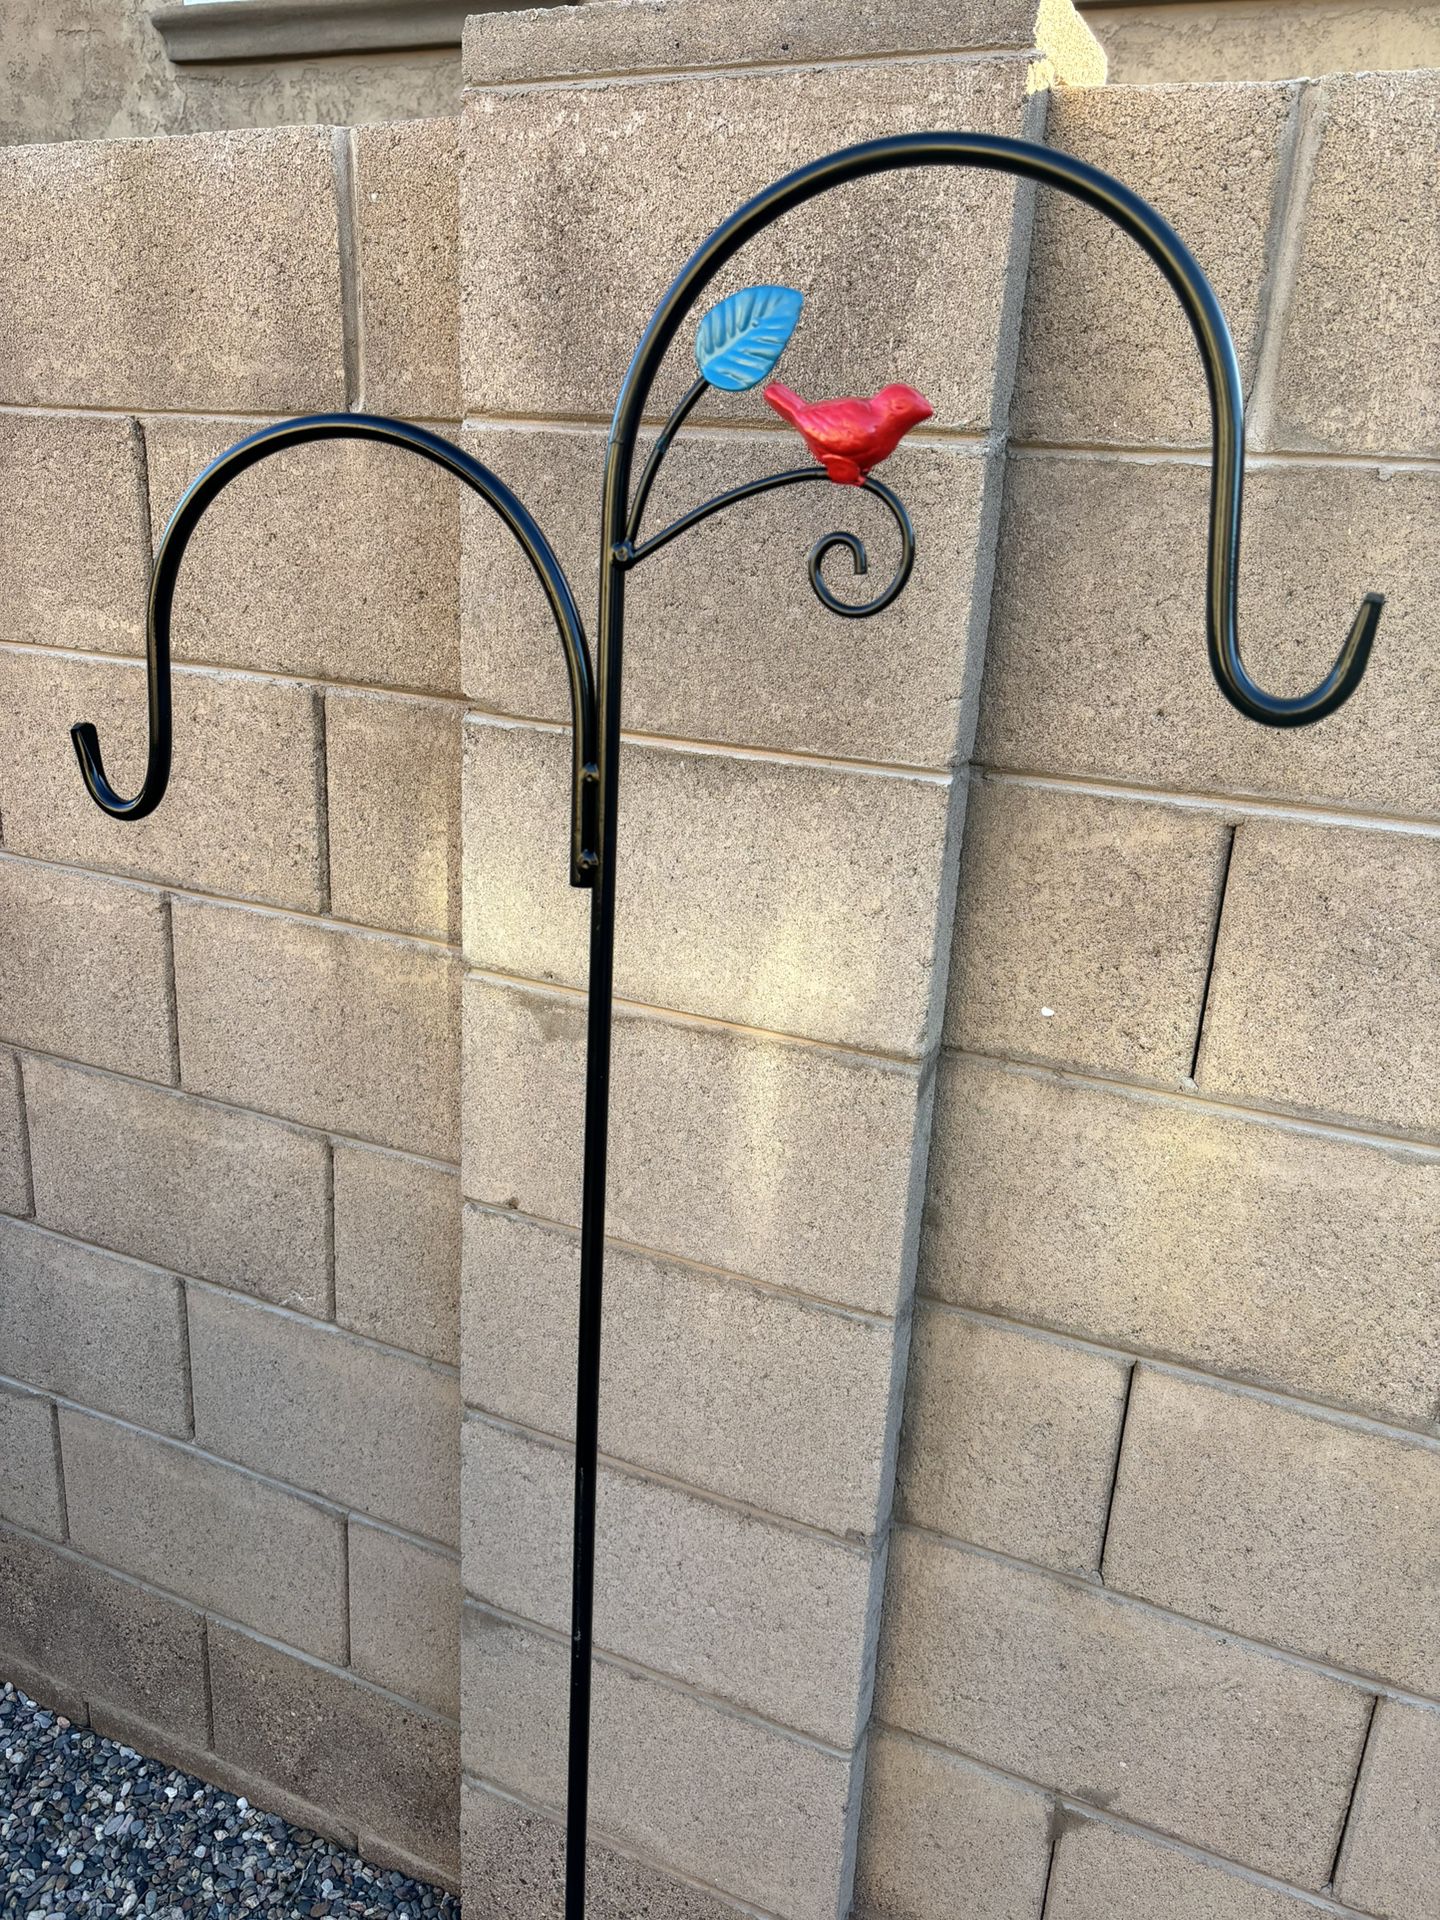 Newly Restored Bird Feeder / Plant Holder. Shiny like new. The dimensions are 64H x 24W